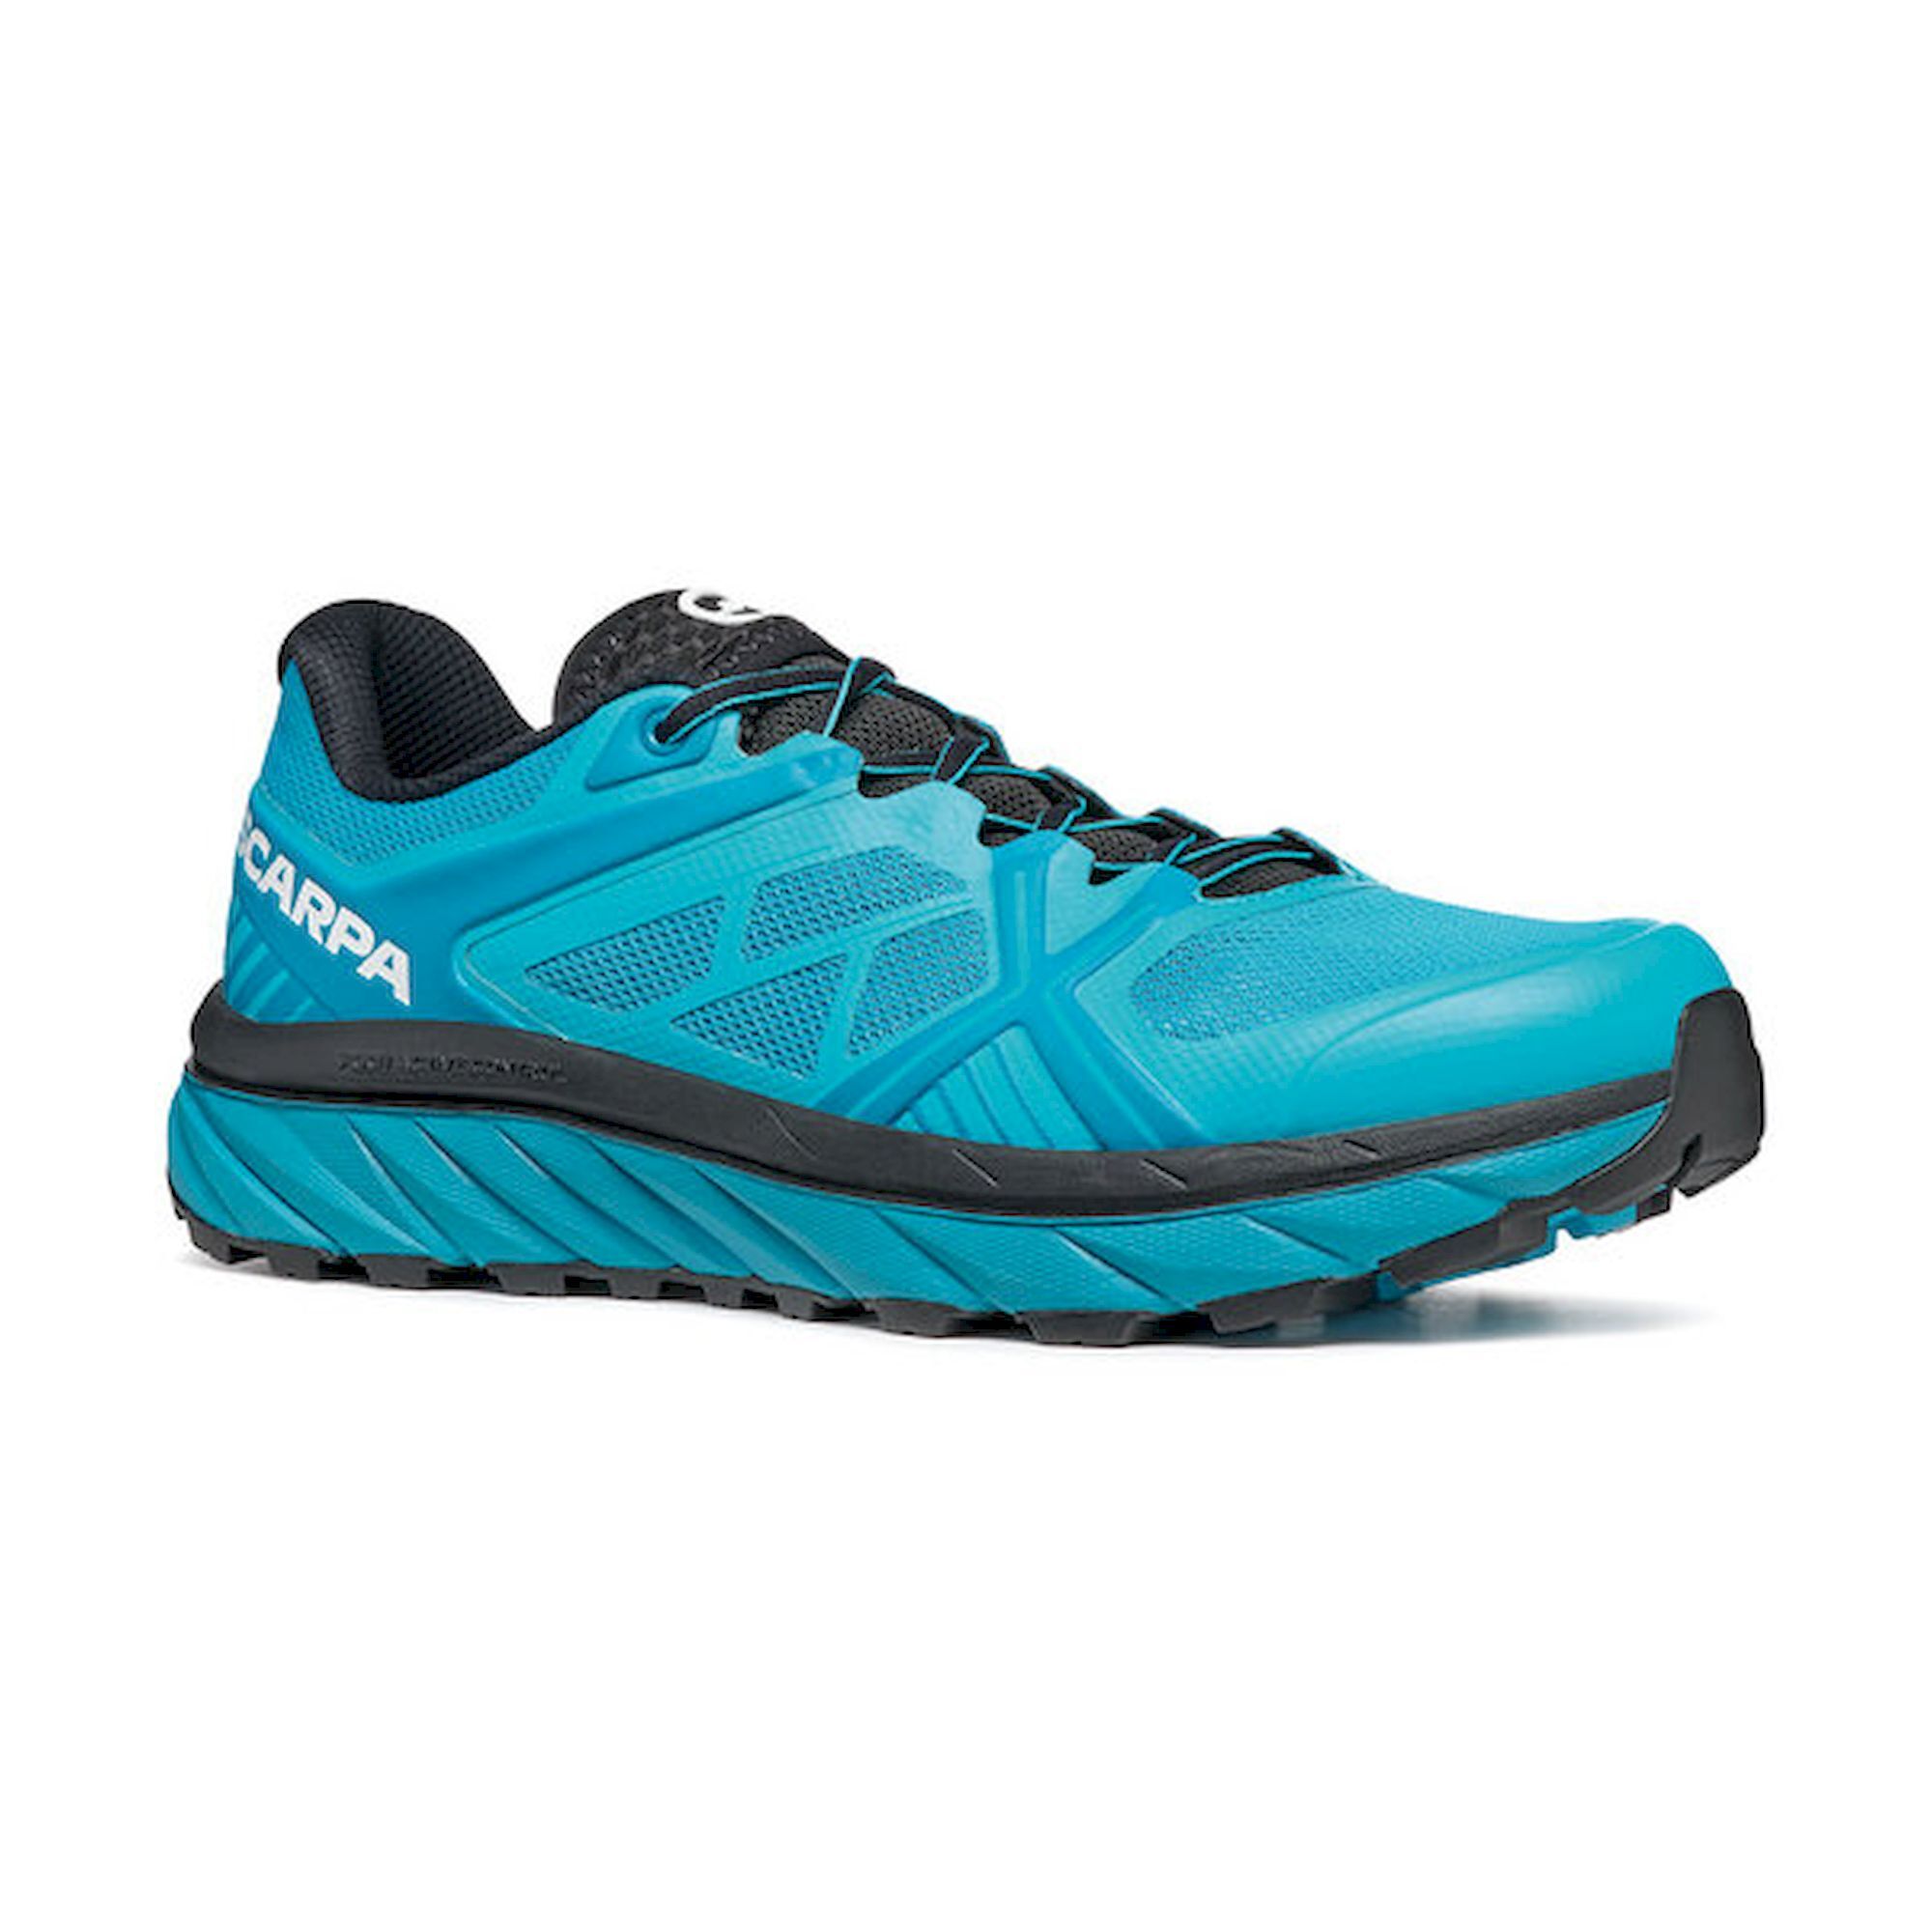 Scarpa Spin Infinity - Trail running shoes - Men's | Hardloop